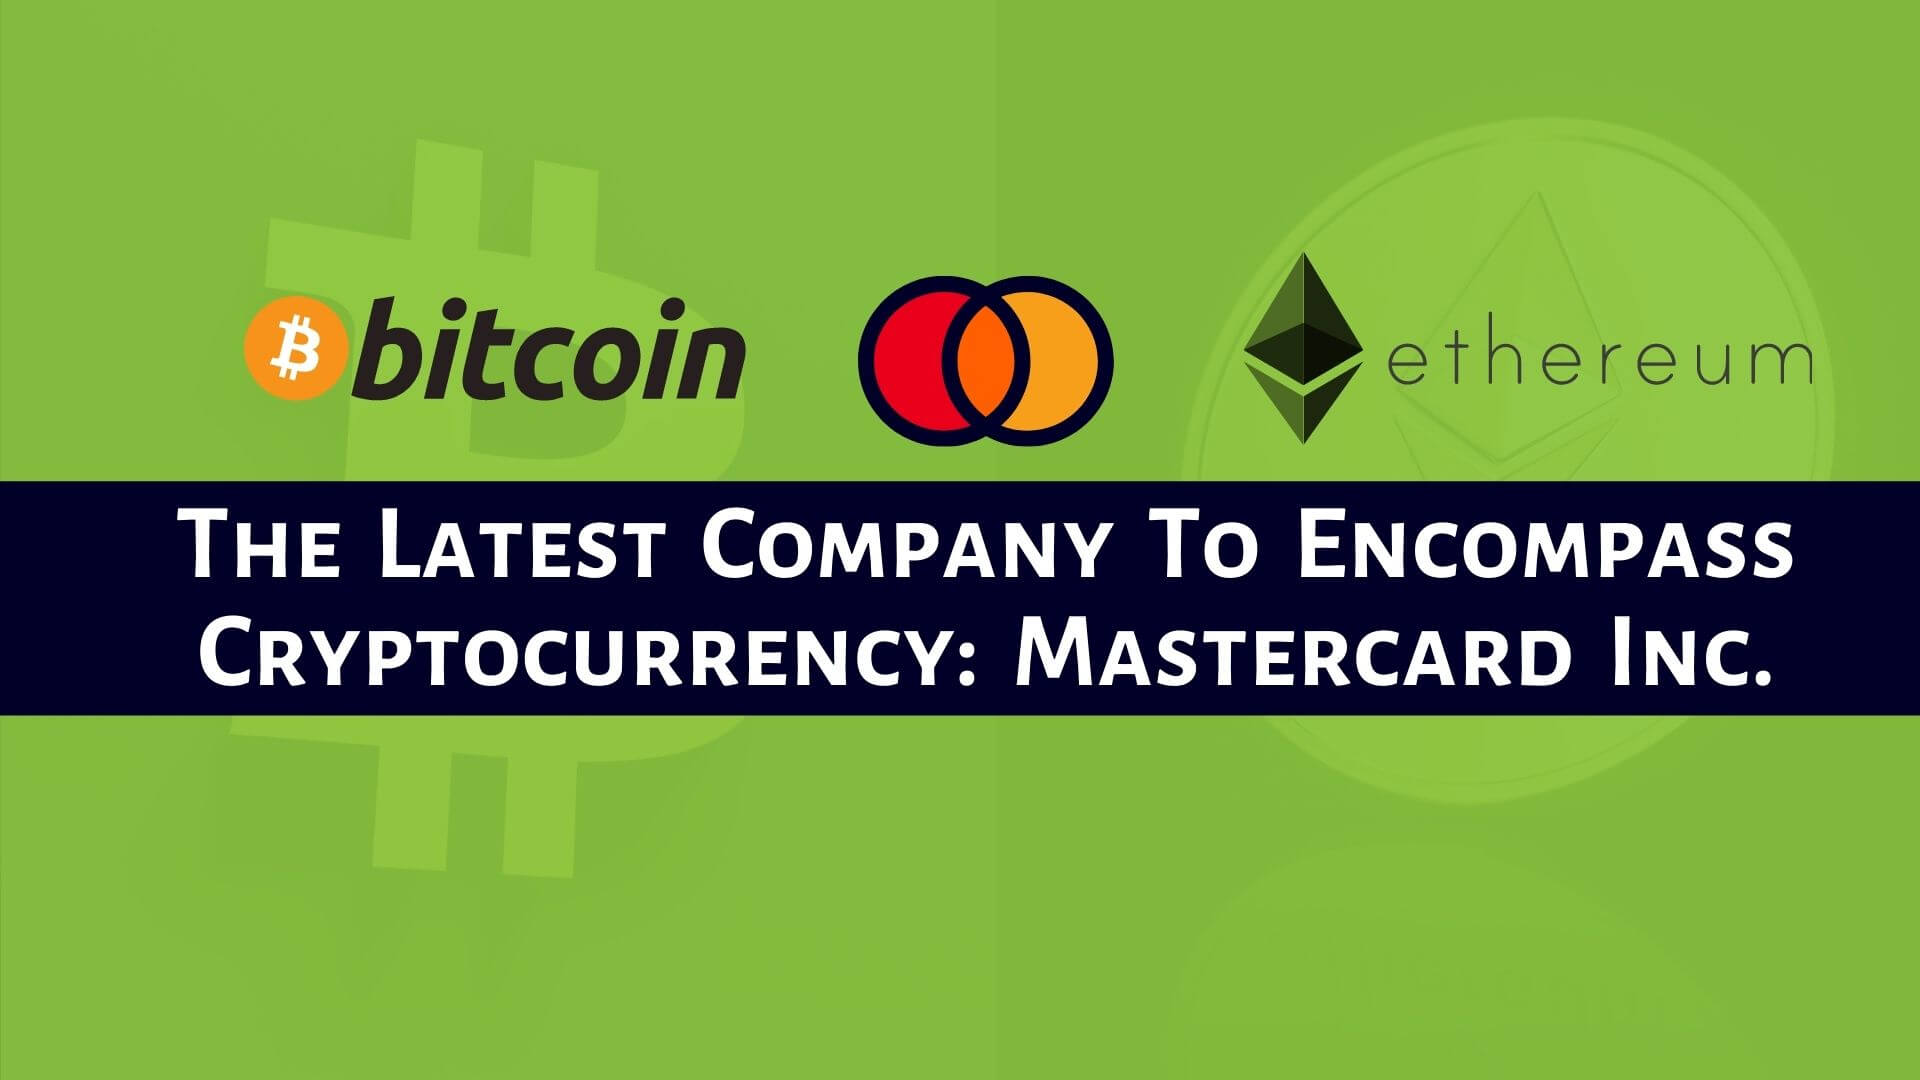 Mastercard Inc The Latest Fintech Company To Encompass Cryptocurrency-Binoption